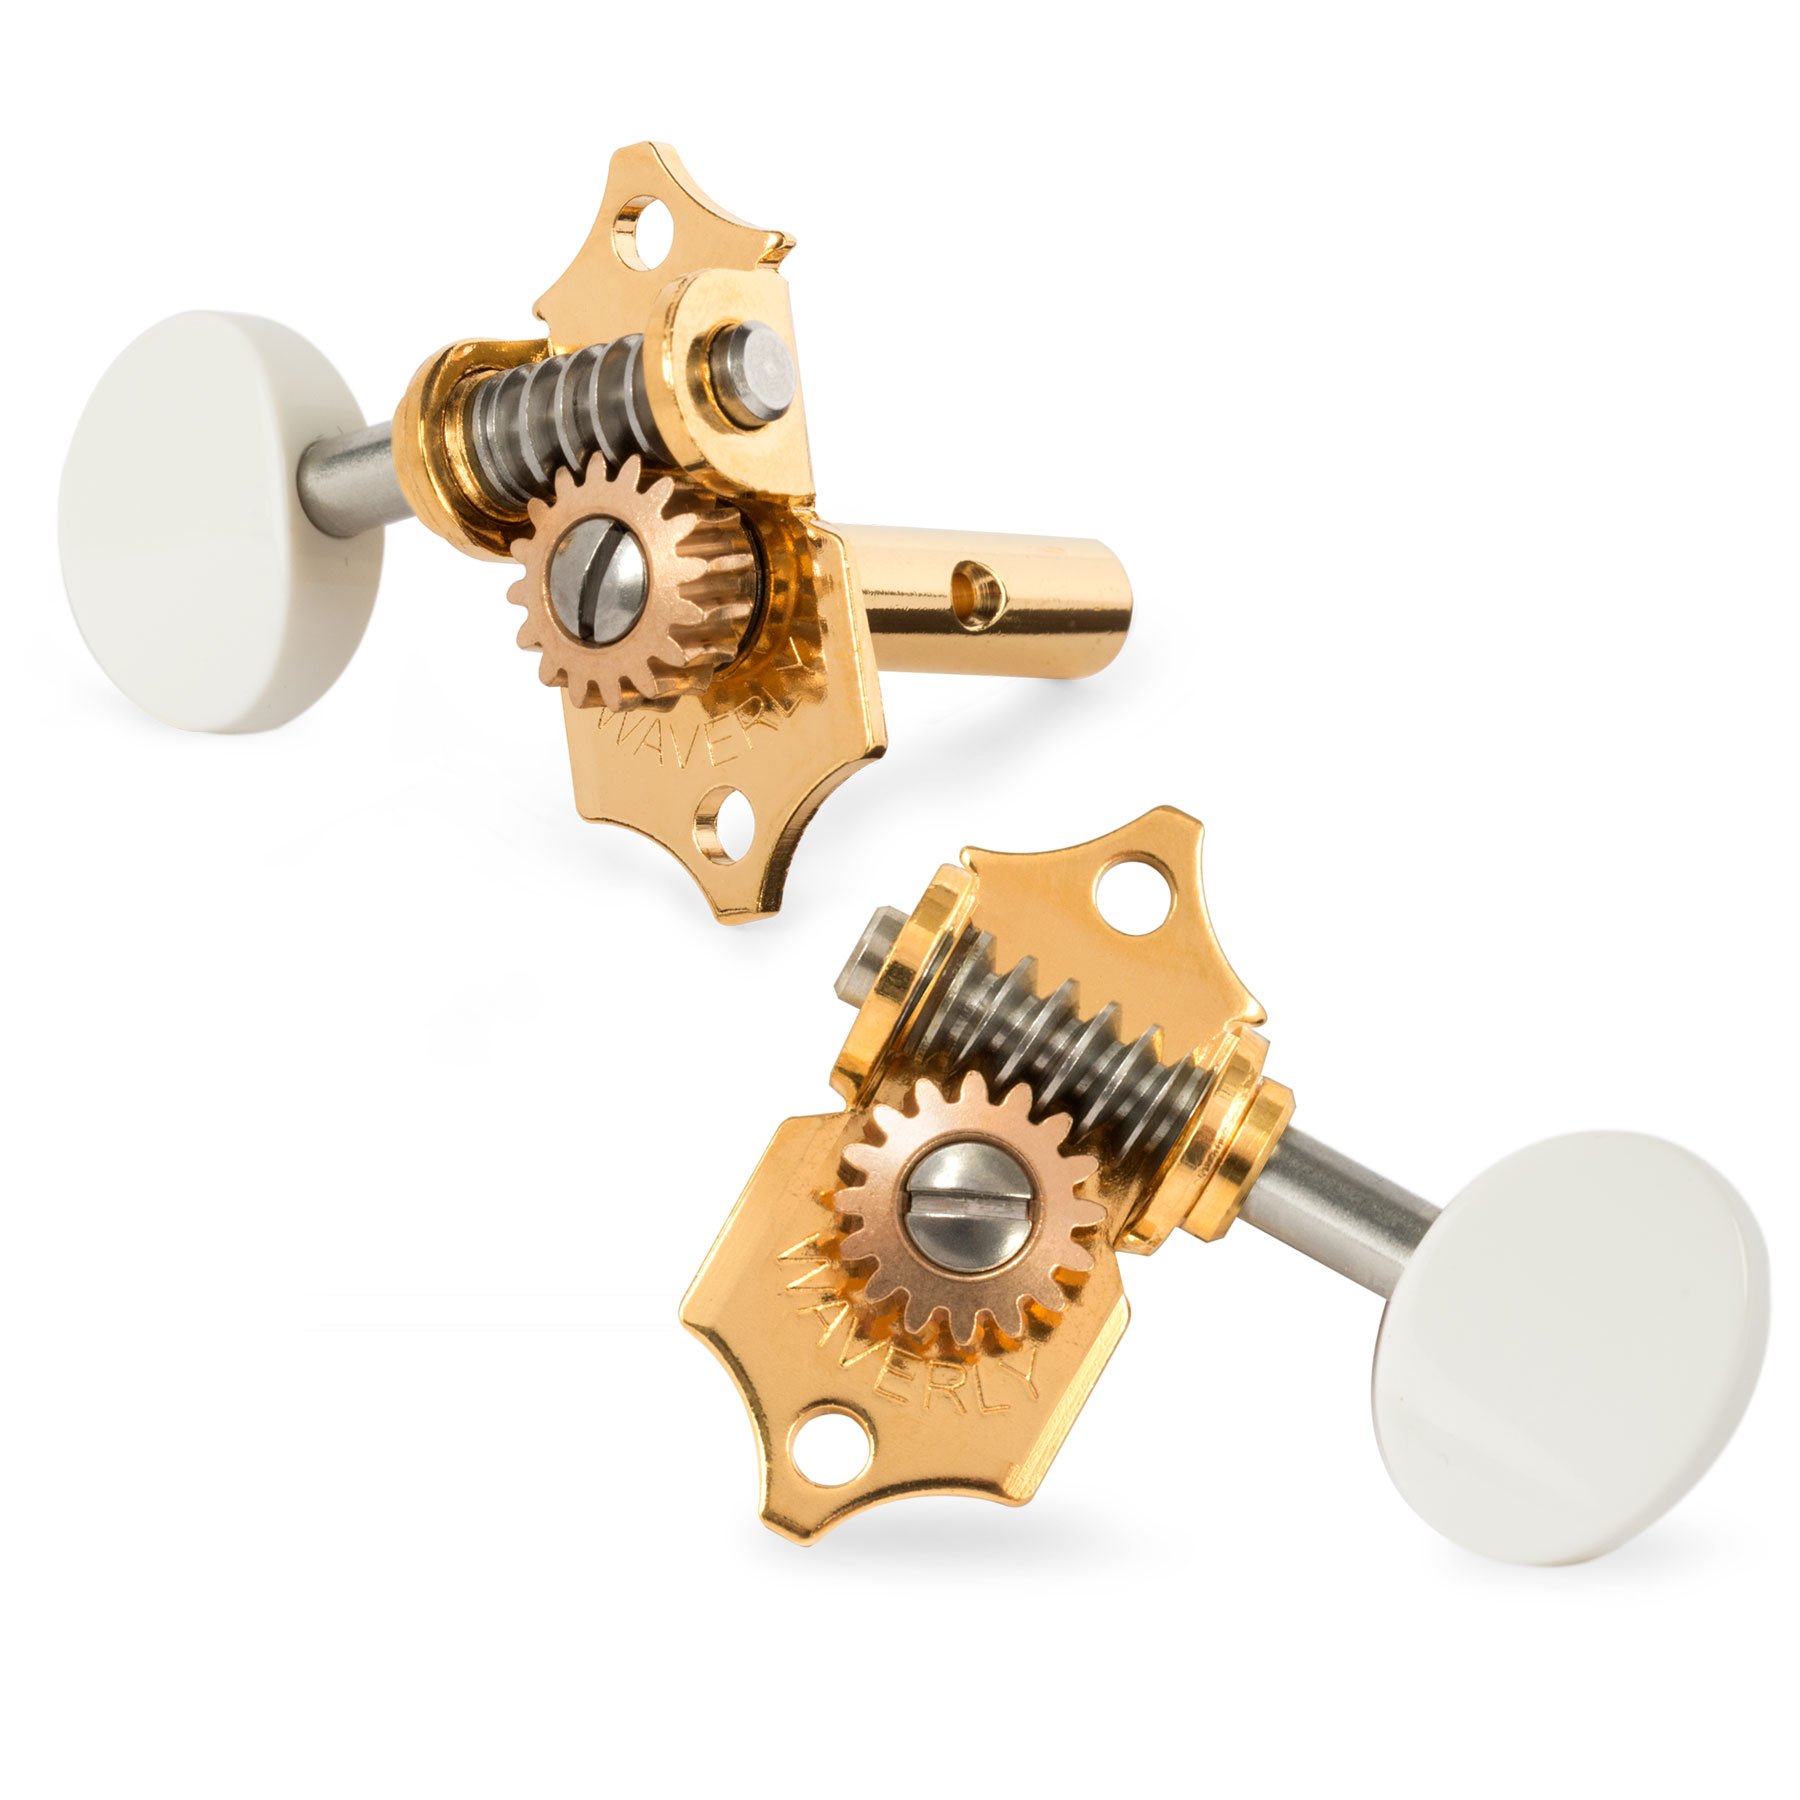 Waverly Guitar Tuners with White Knobs for Slotted Pegheads